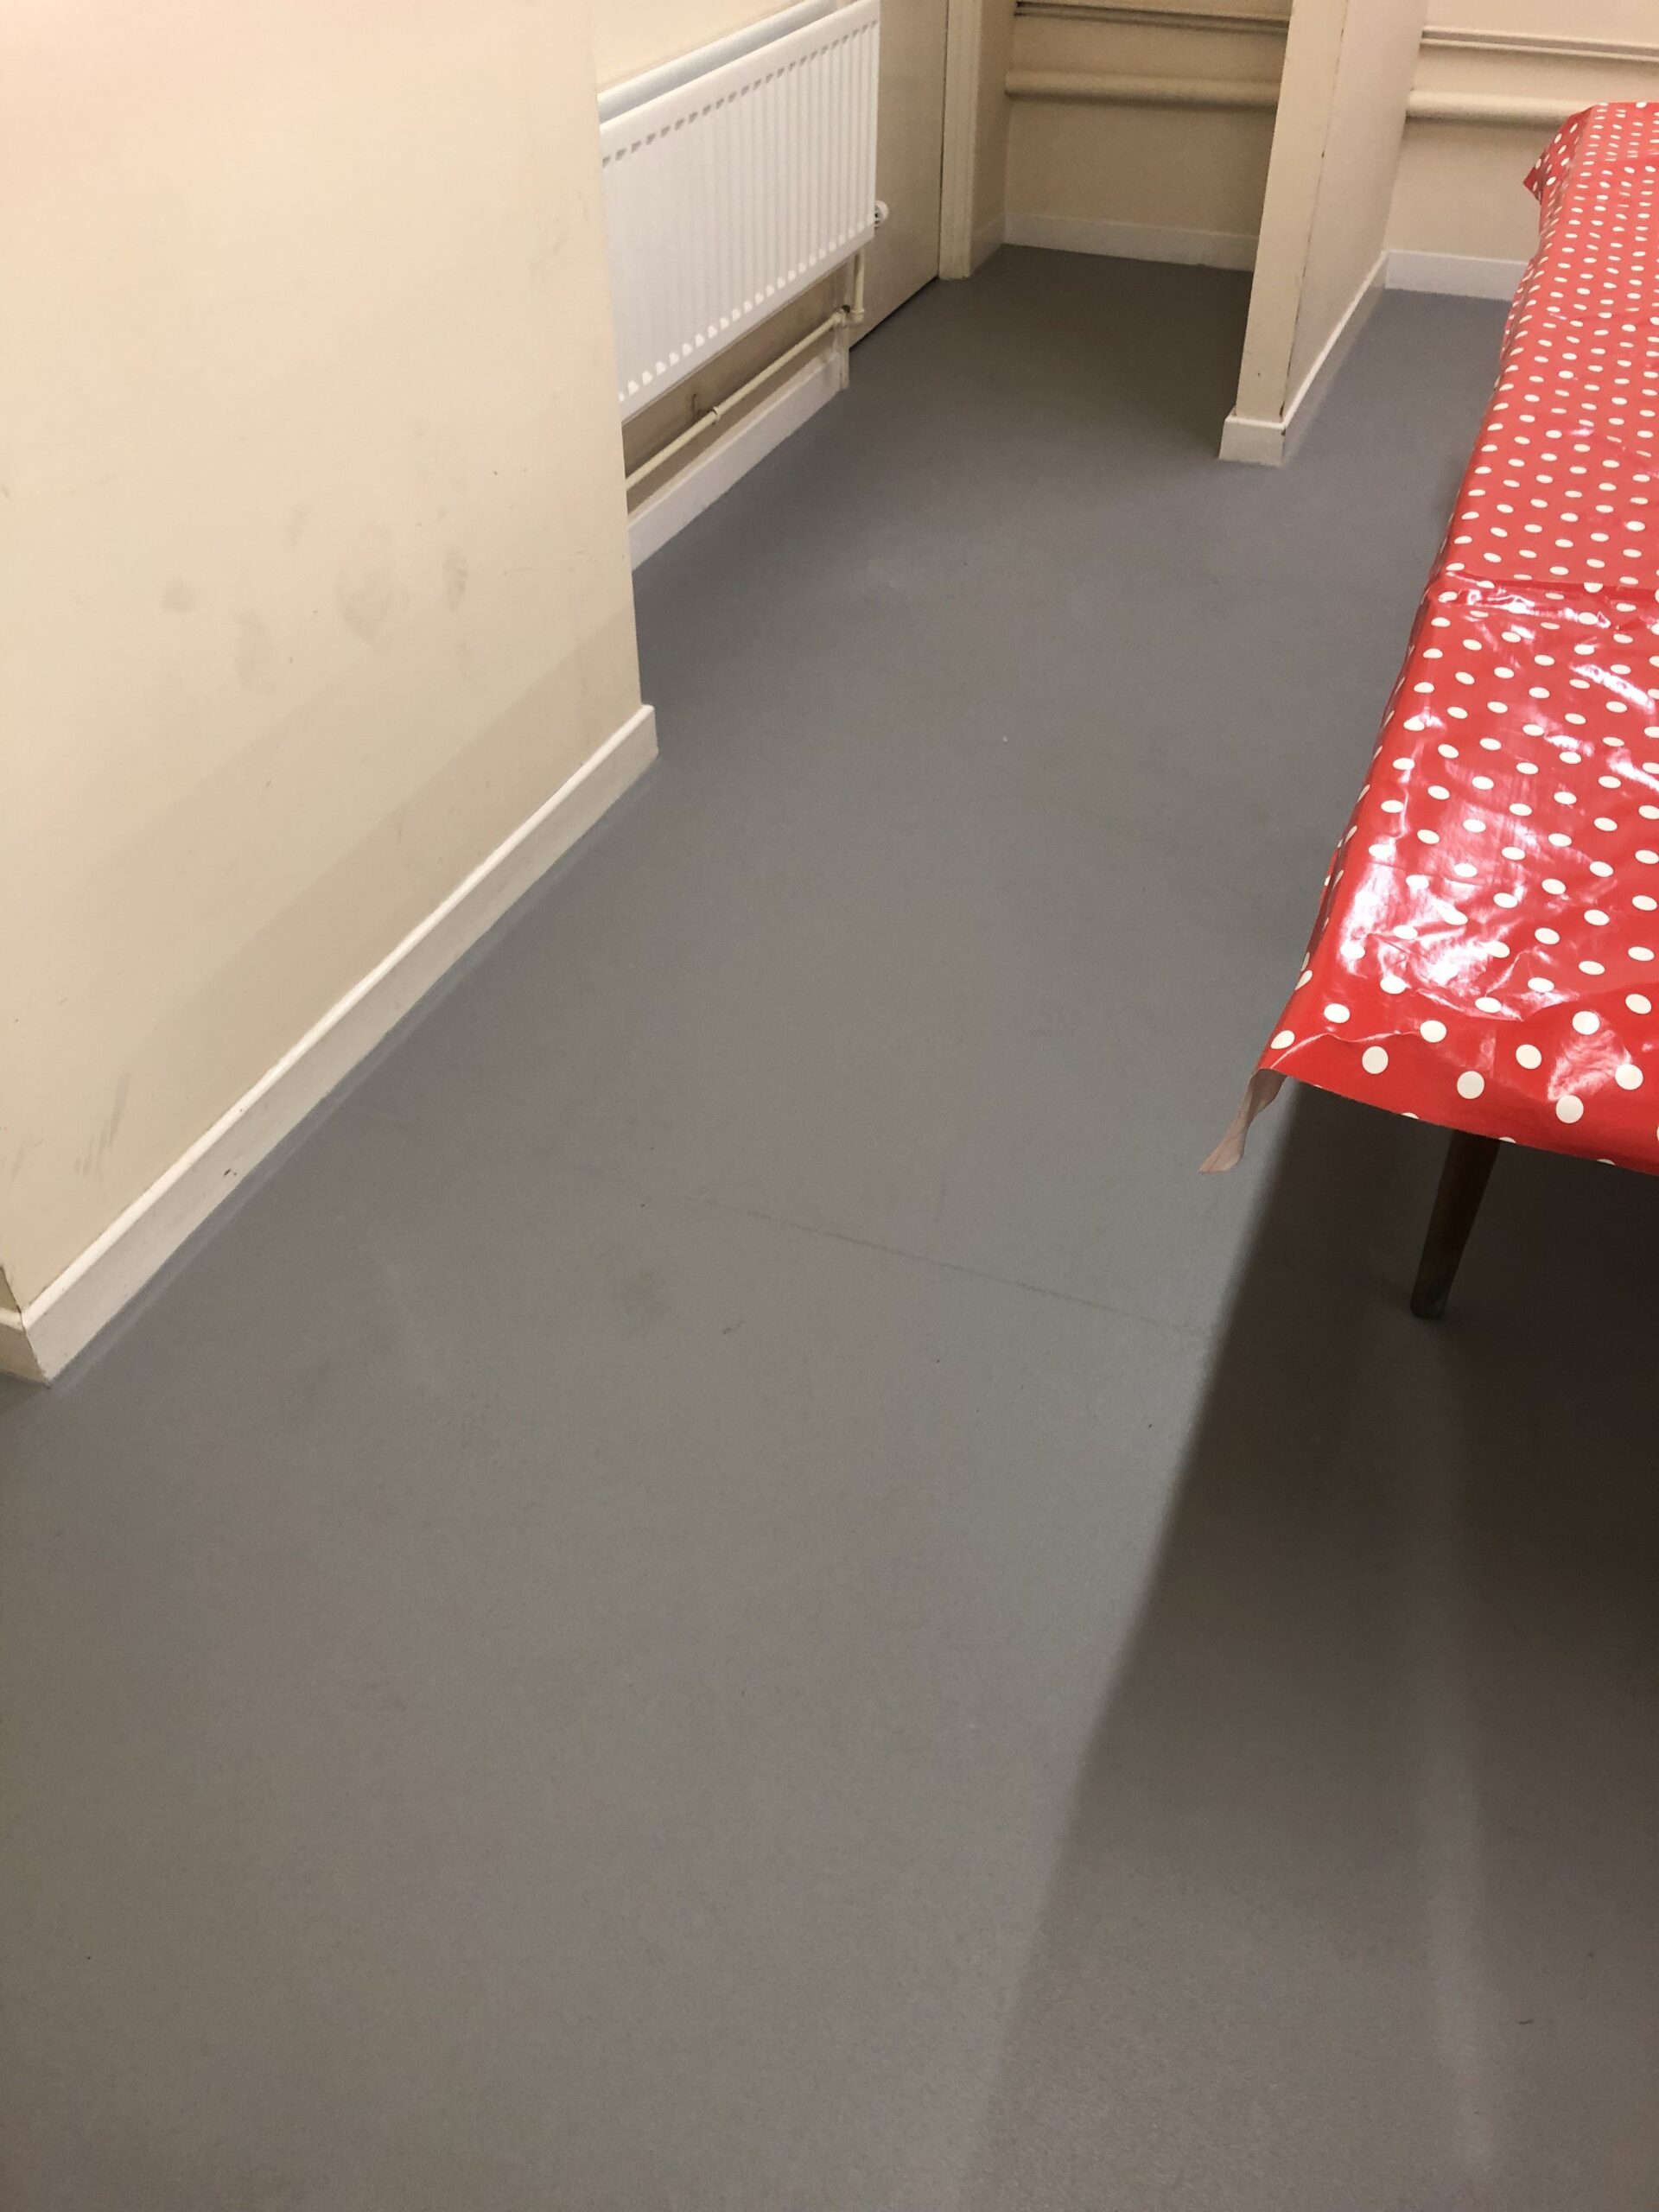 Altro Flooring Has Now Been Completed Midland Carpets And Flooring